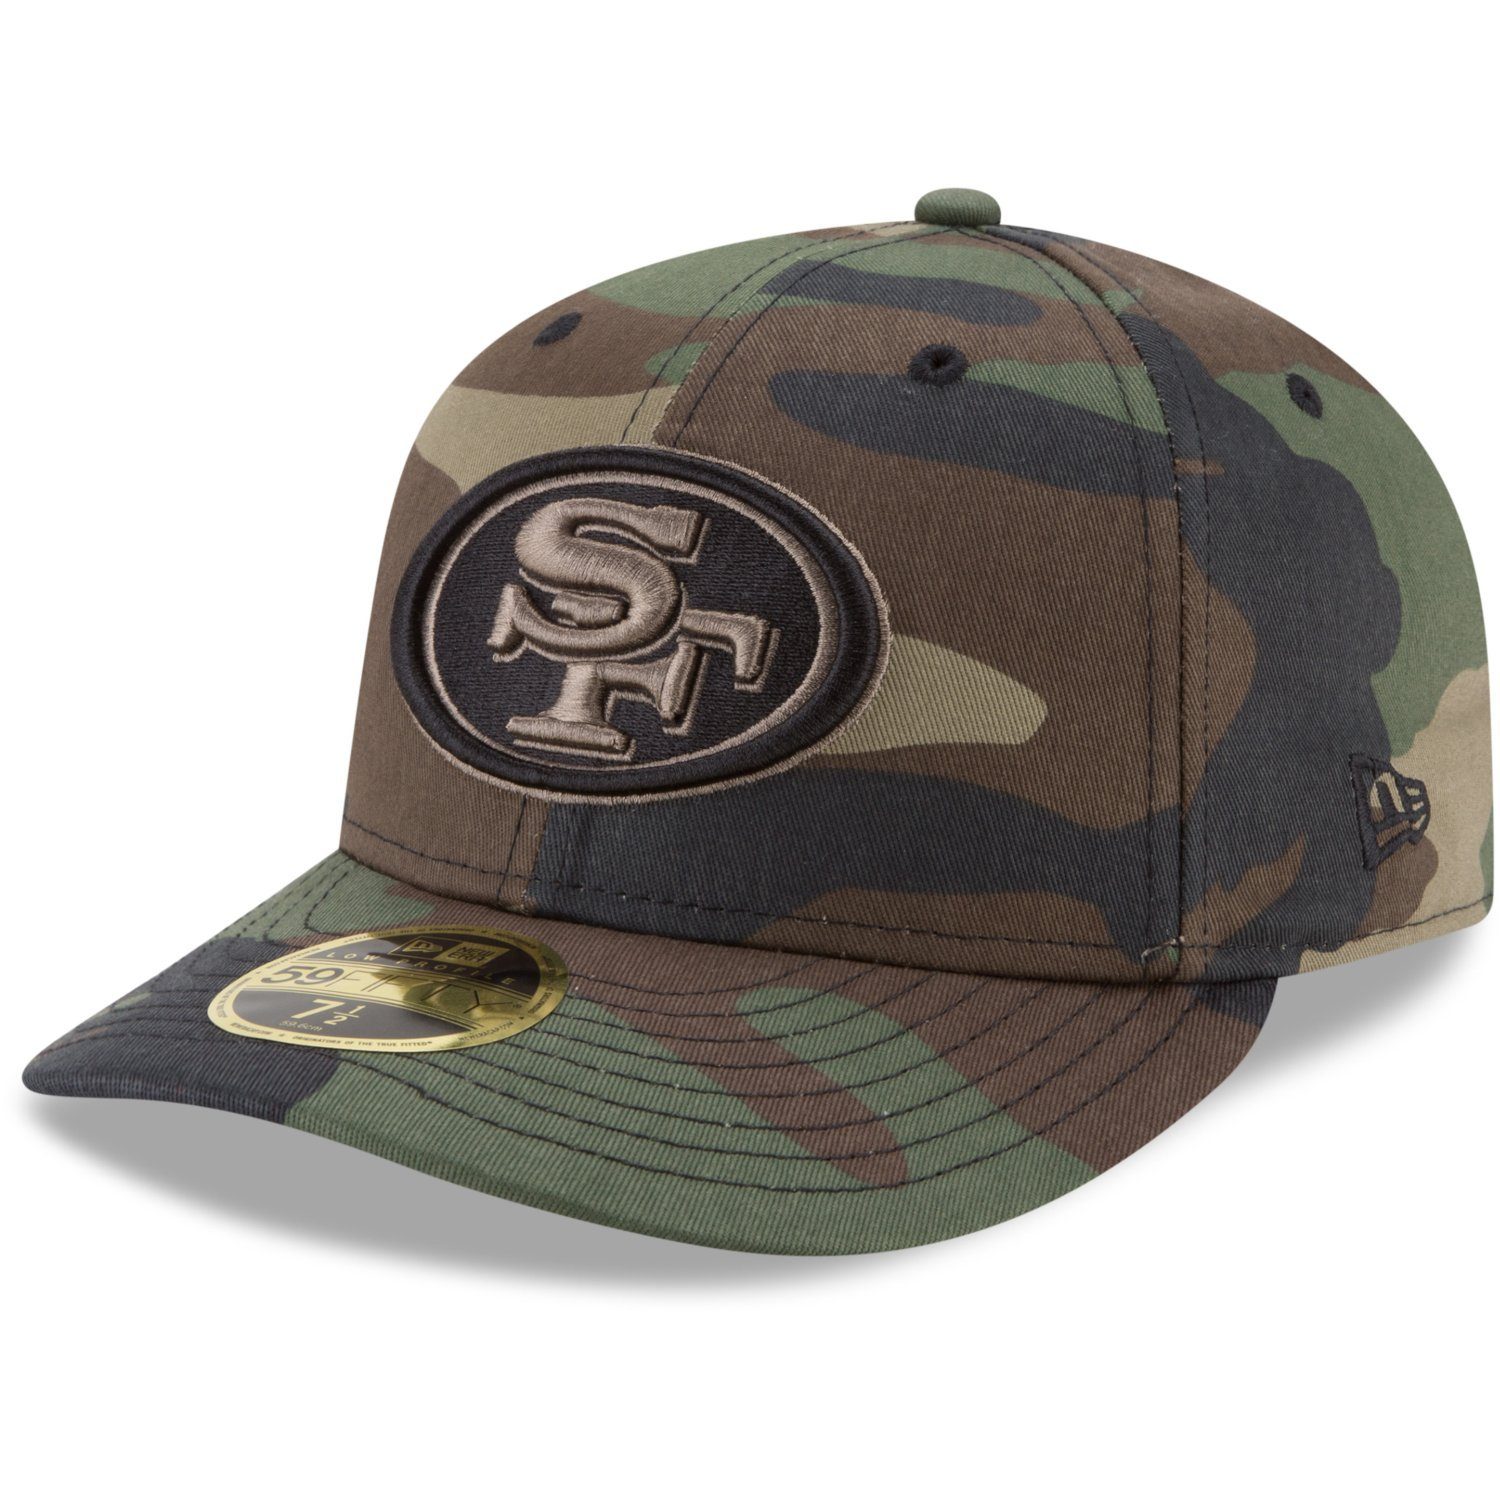 New Era Fitted Cap 59Fifty woodland Low NFL 49ers San Francisco Profile Teams